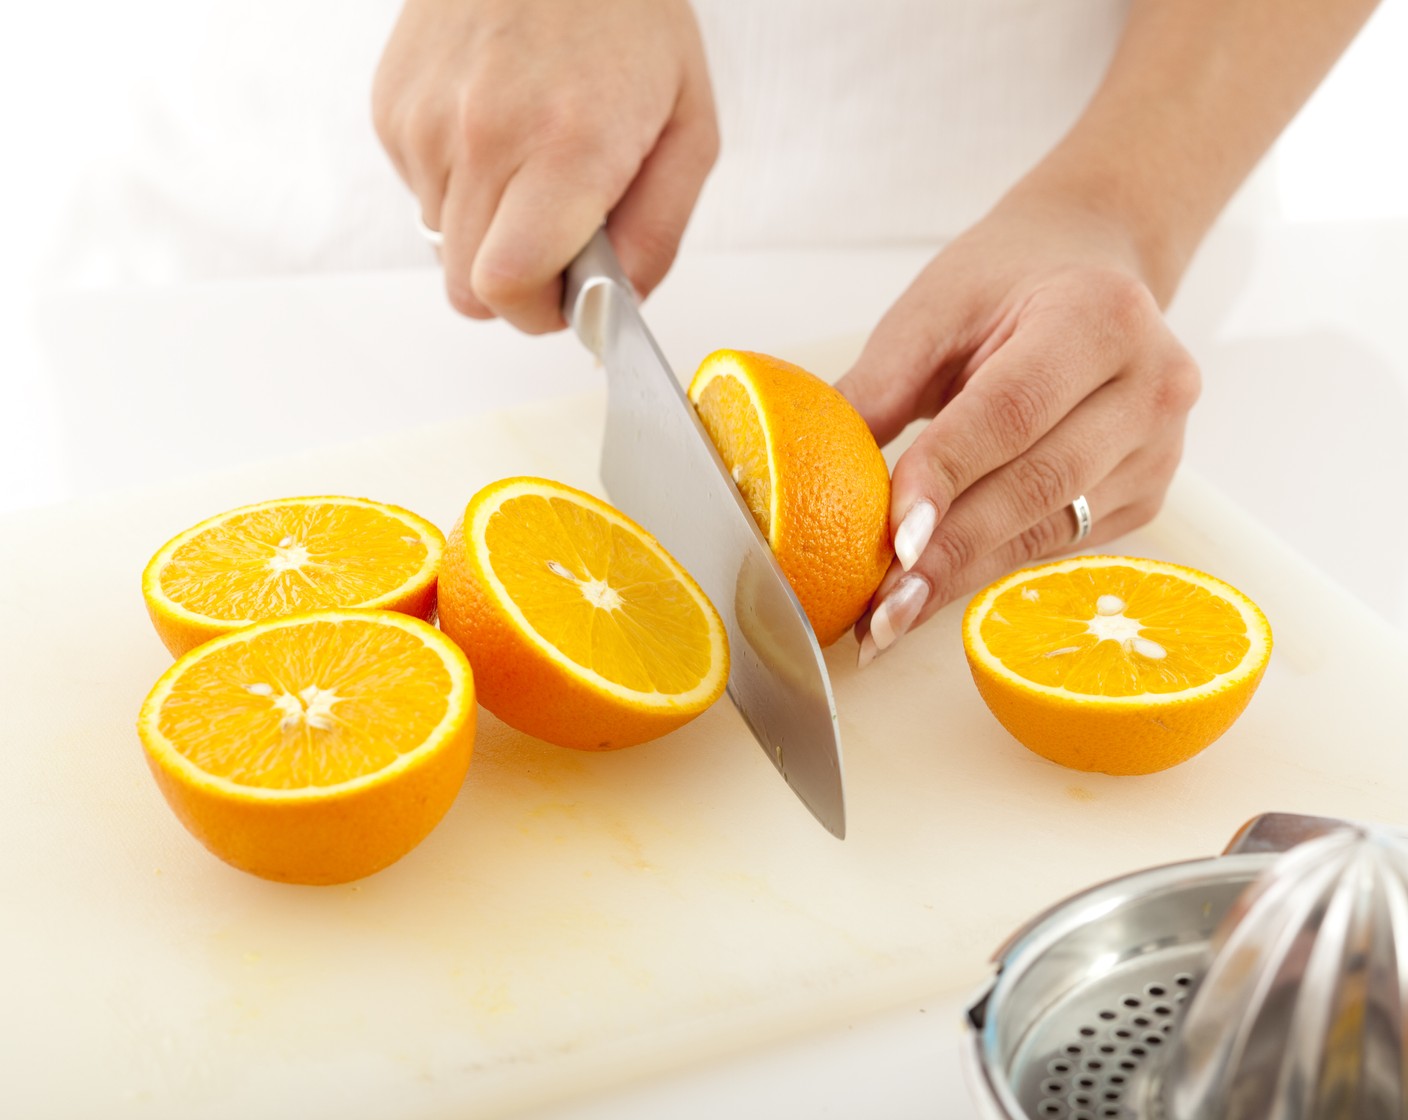 step 2 Slice Navel Oranges (3) in half and use a paring knife and spoon to remove flesh and white pith being careful not to tear them. Place orange halves in a casserole dish.